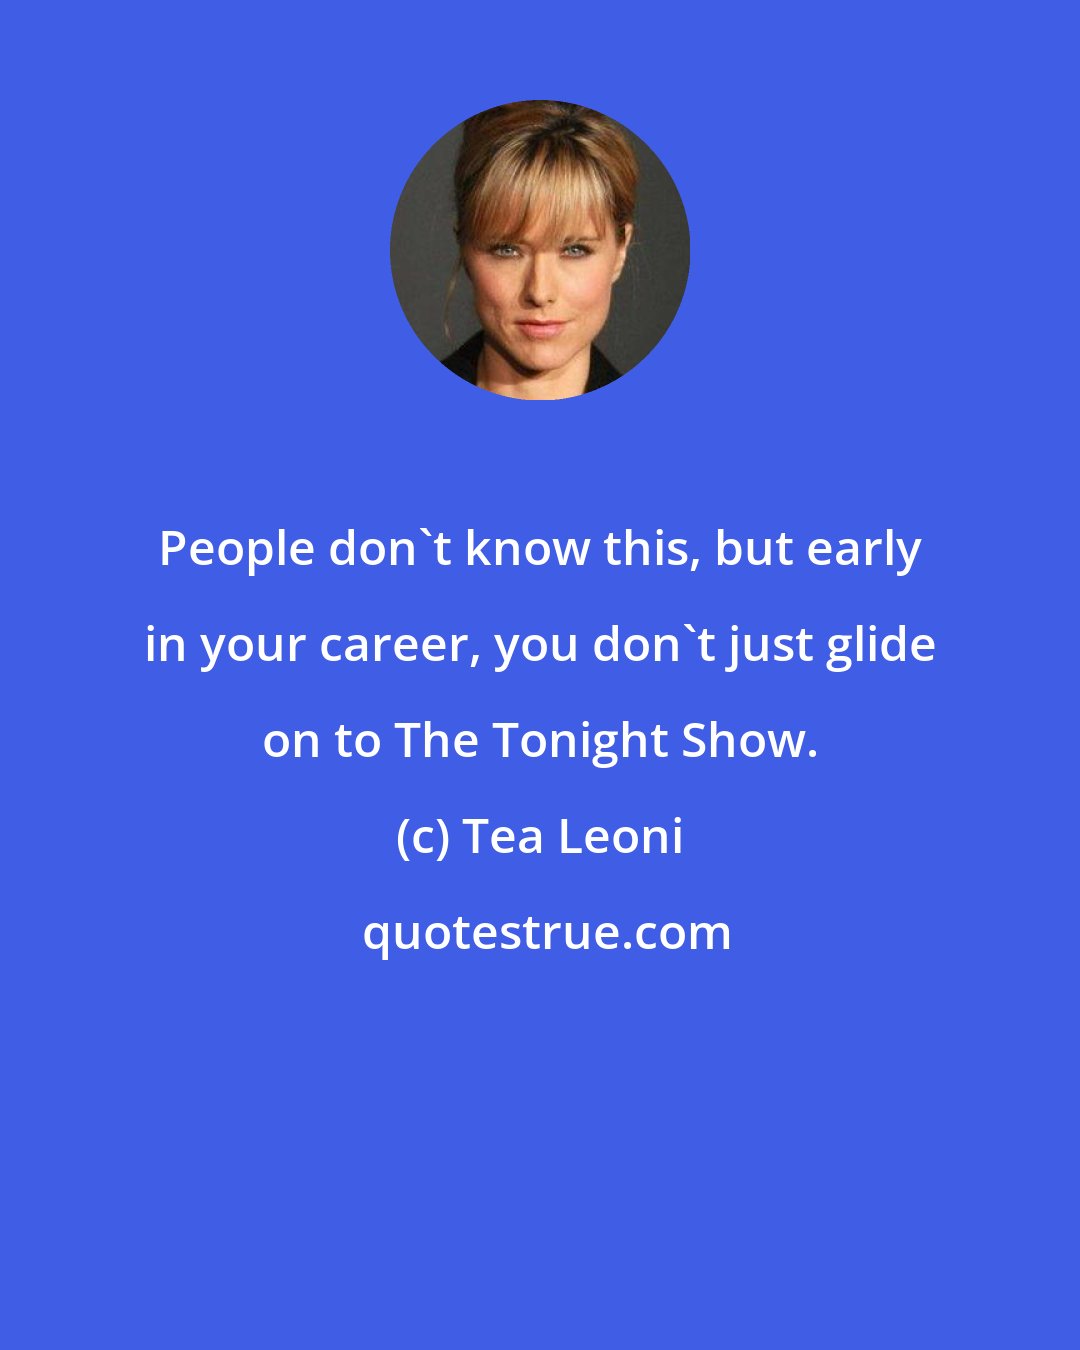 Tea Leoni: People don't know this, but early in your career, you don't just glide on to The Tonight Show.